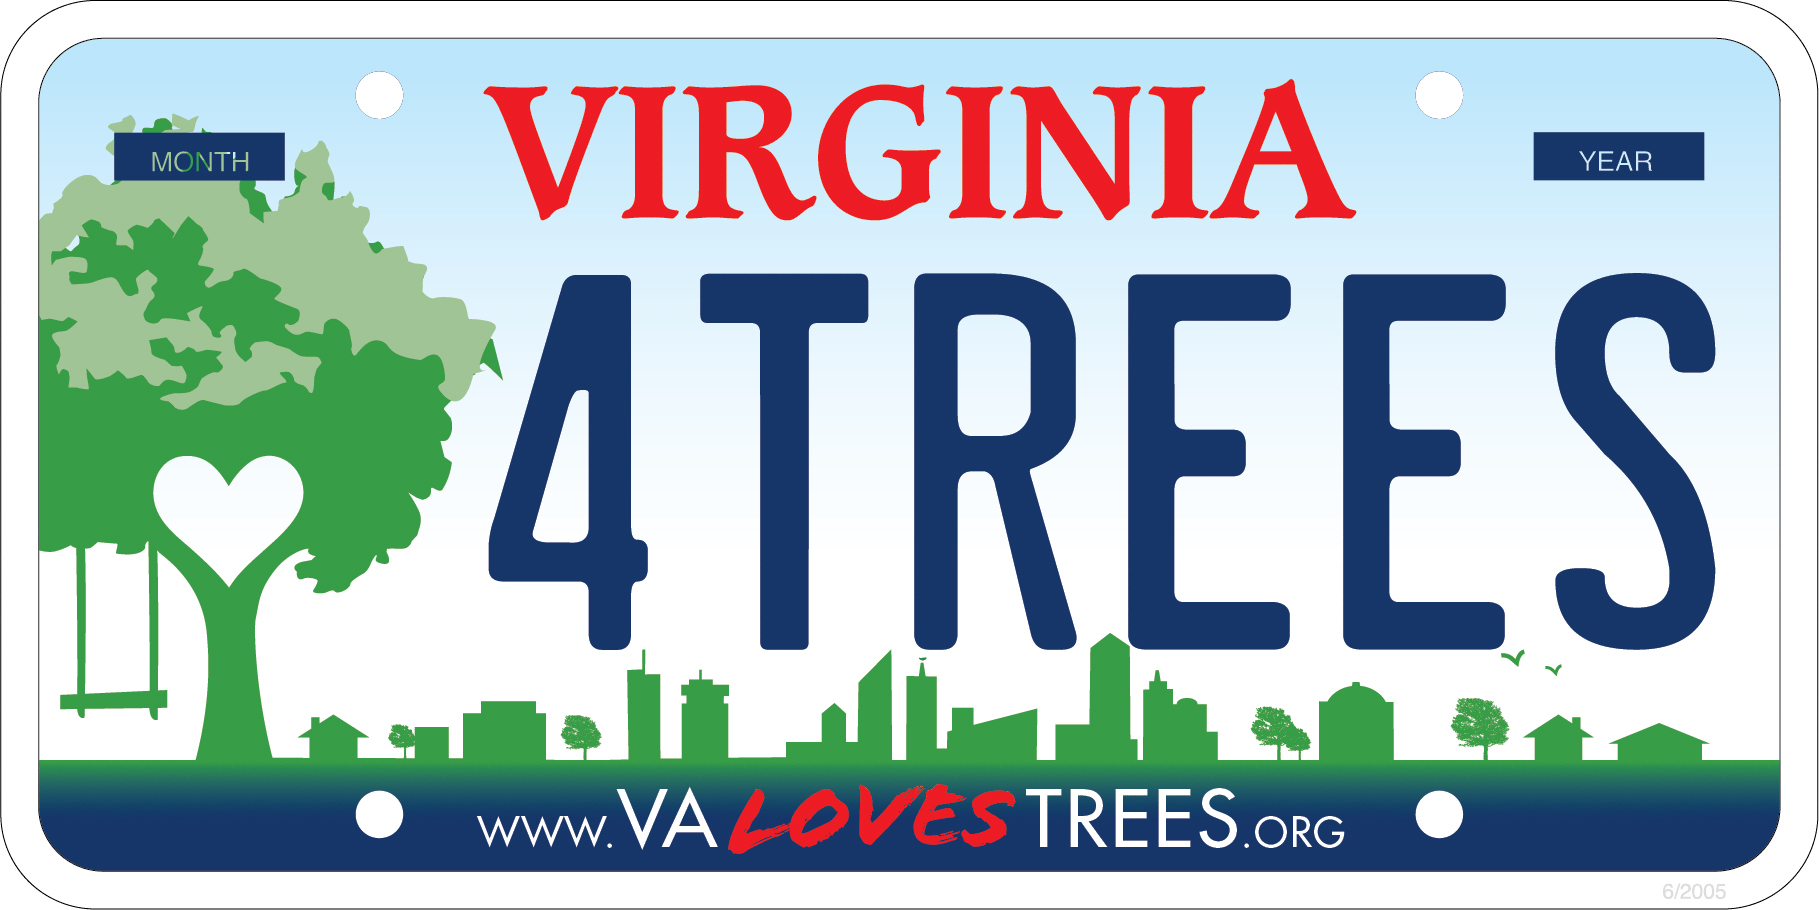 Design of the Virginia Loves Trees license plate, with a tree to the left side and a community skyline in the background.